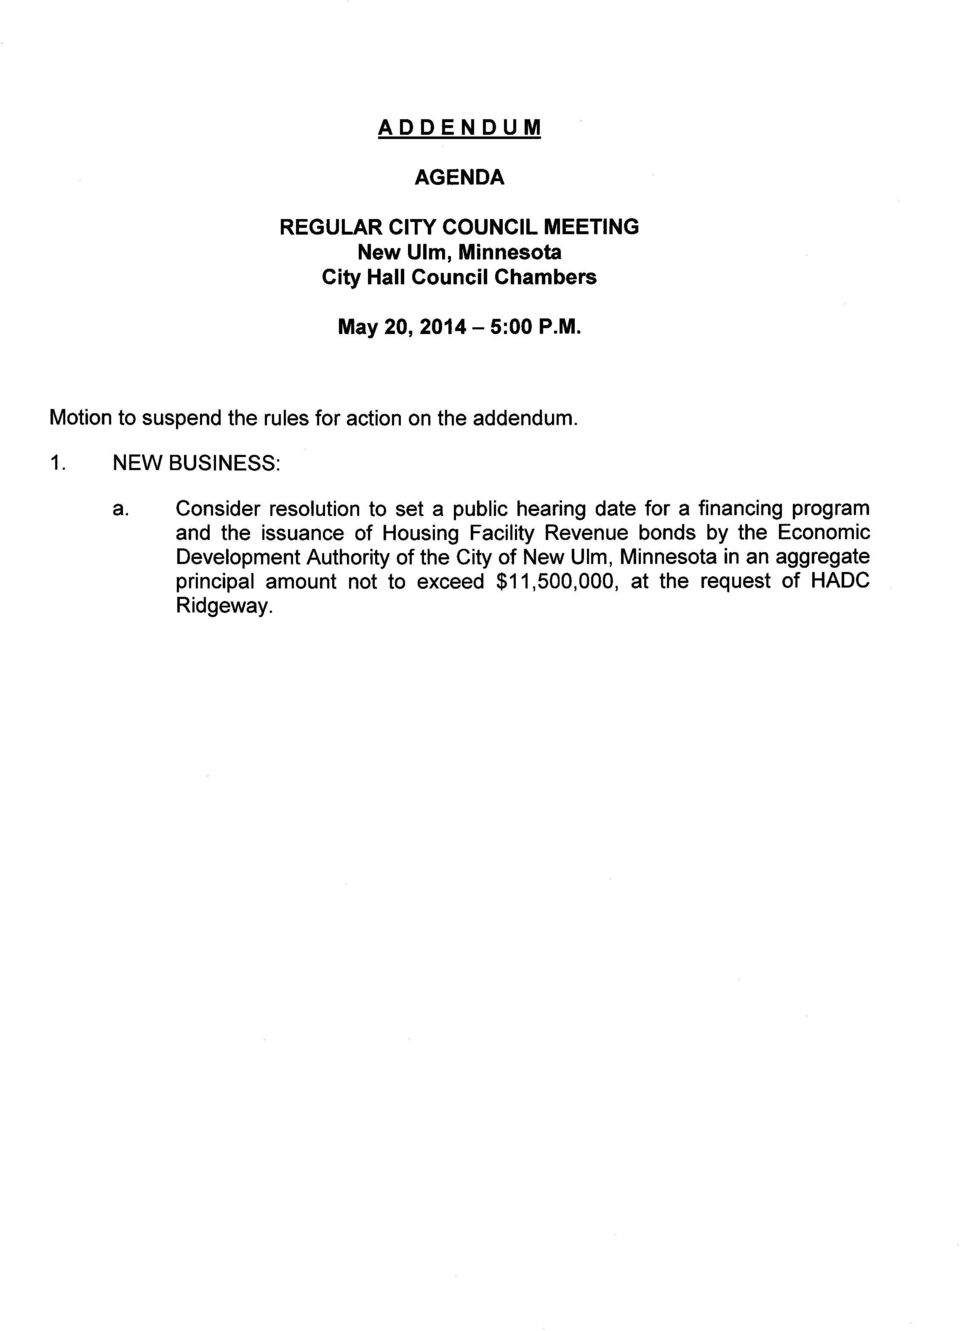 Consider resolution to set a public hearing date for a financing program and the issuance of Housing Facility Revenue